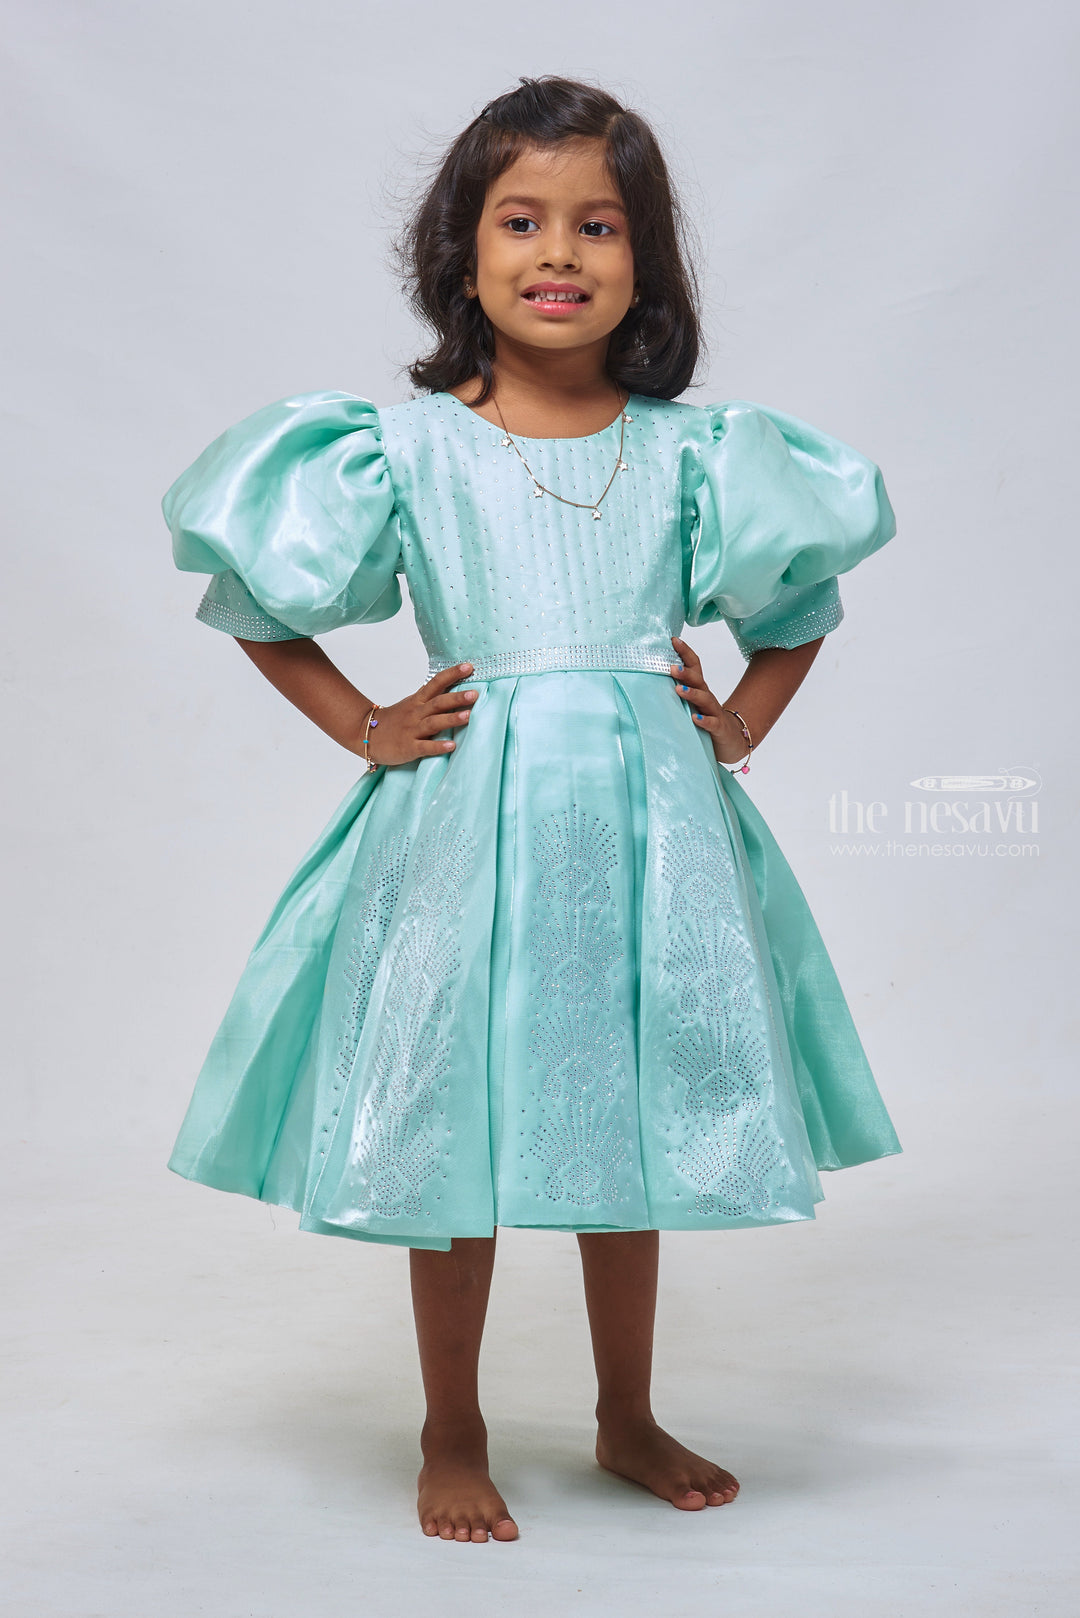 The Nesavu Girls Fancy Party Frock Sapphire Elegance: Sparkling Stone-Worked Box Pleated Organza Party Frock Nesavu 12 (3M) / Blue / Silk Blend PF144B-12 Beautiful Baby Girl Party Frock | Exclusive Dresses for Young Girls | The Nesavu